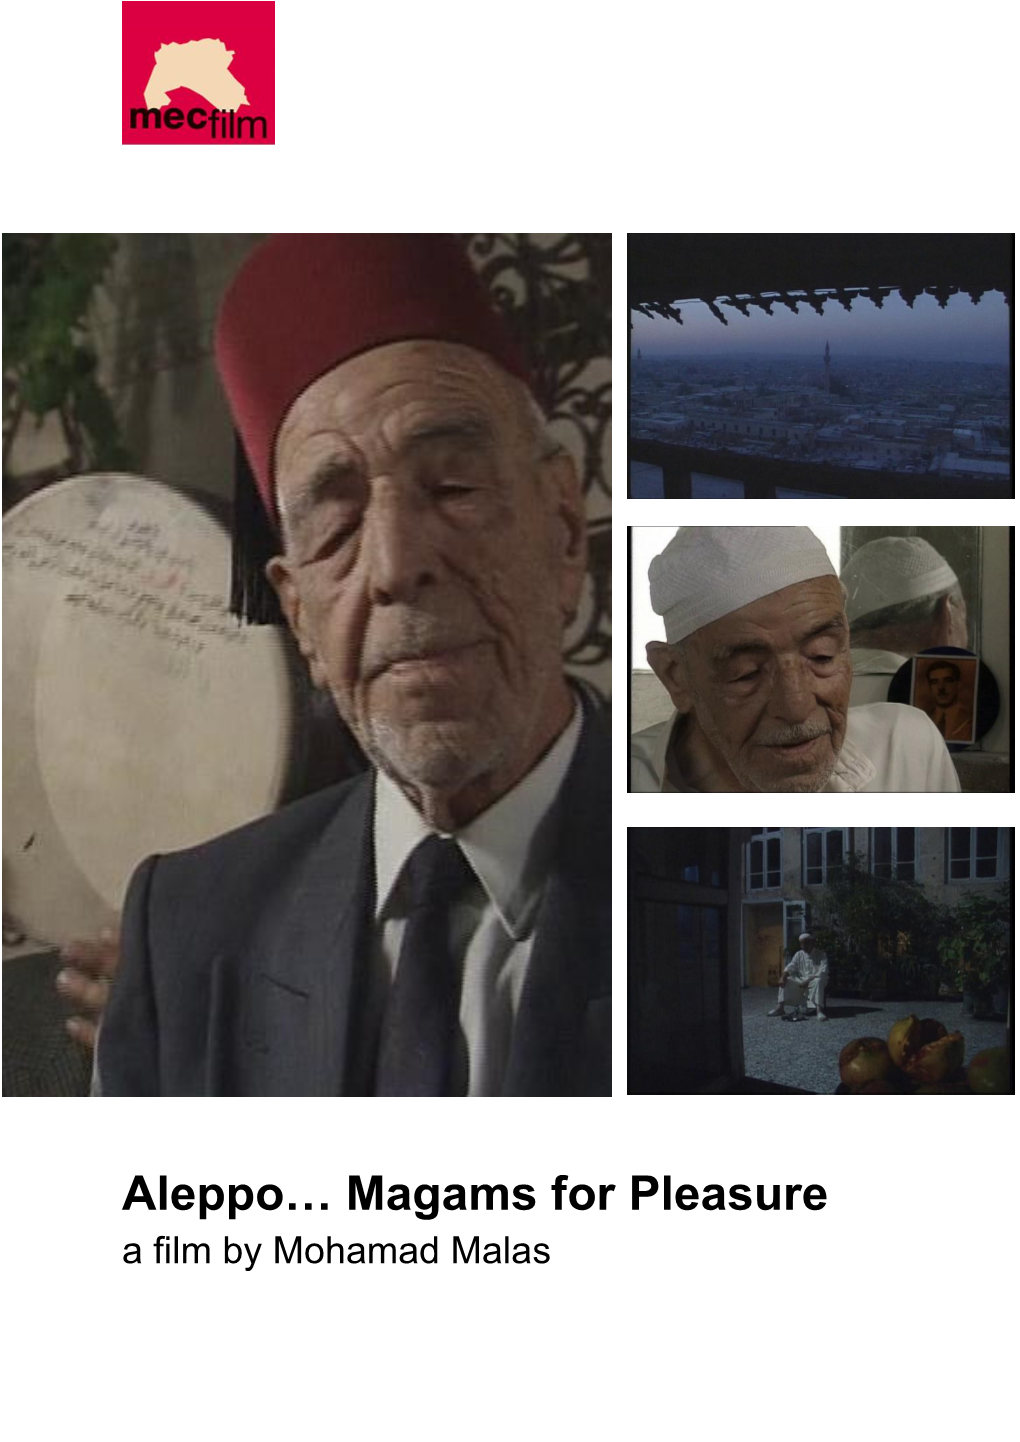 Aleppo… Magams for Pleasure a Film by Mohamad Malas